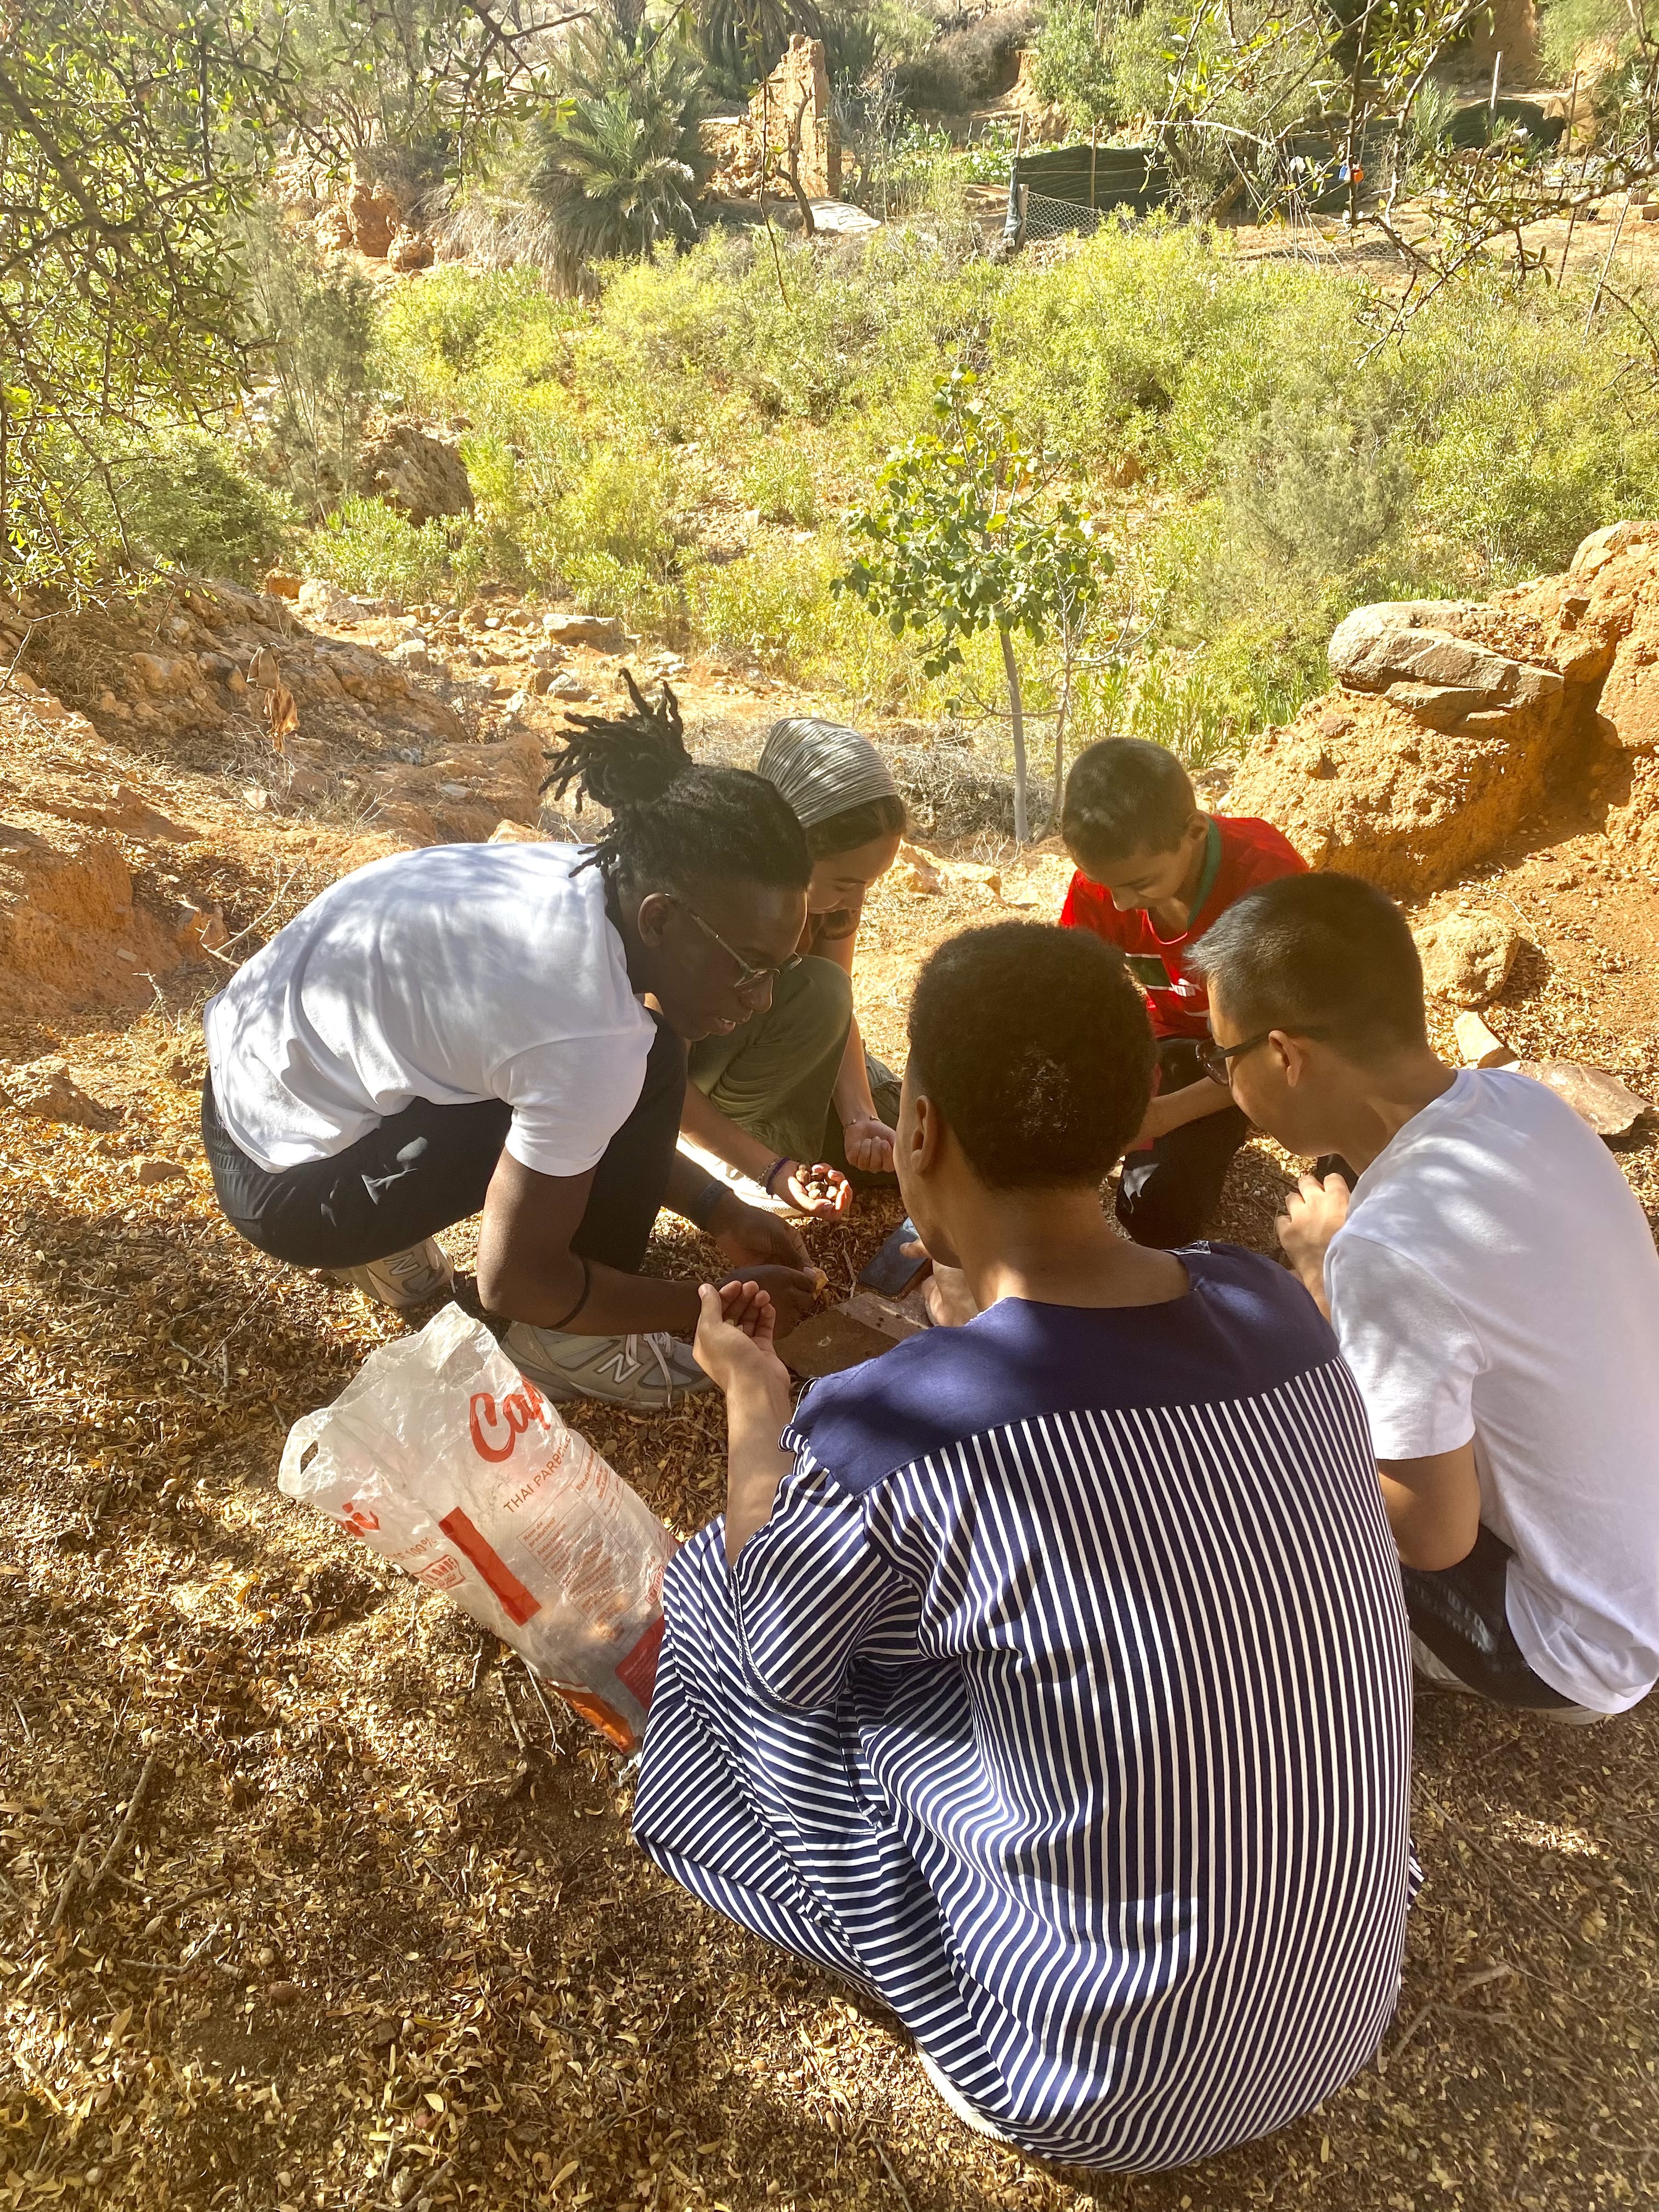 Morocco students help in the countryside